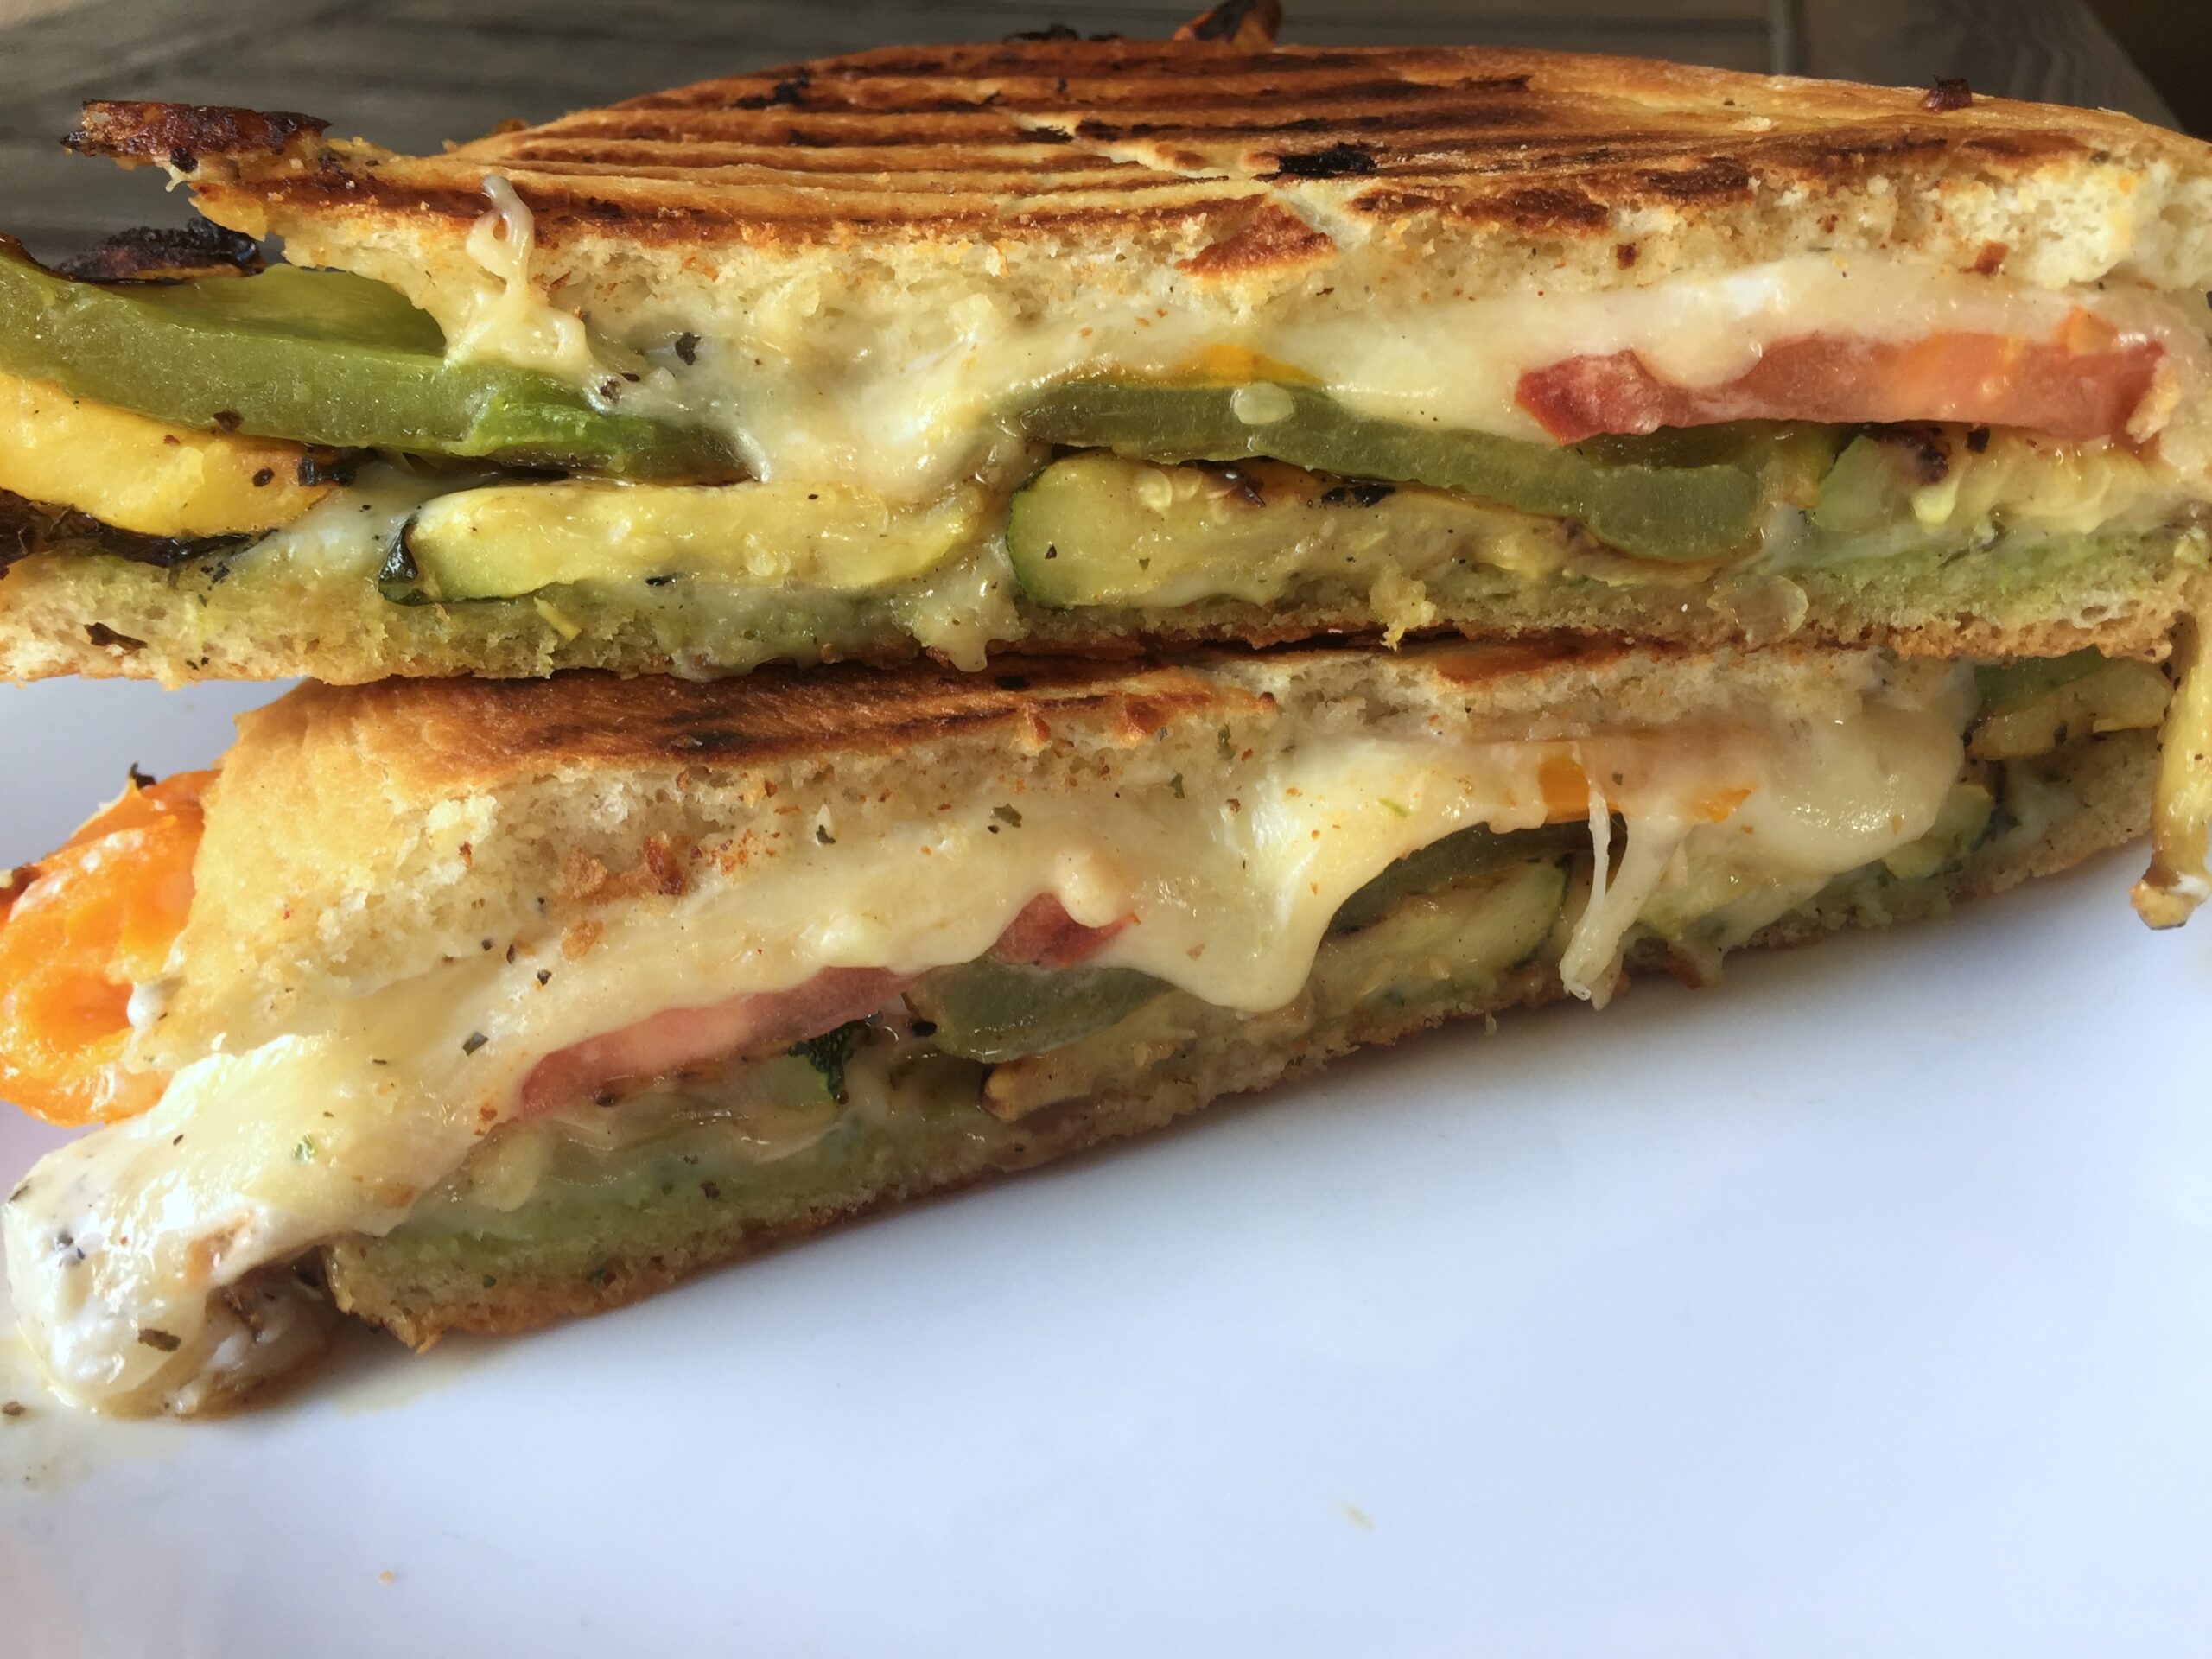 Pesto Grilled Cheese and Vegetable Paninis